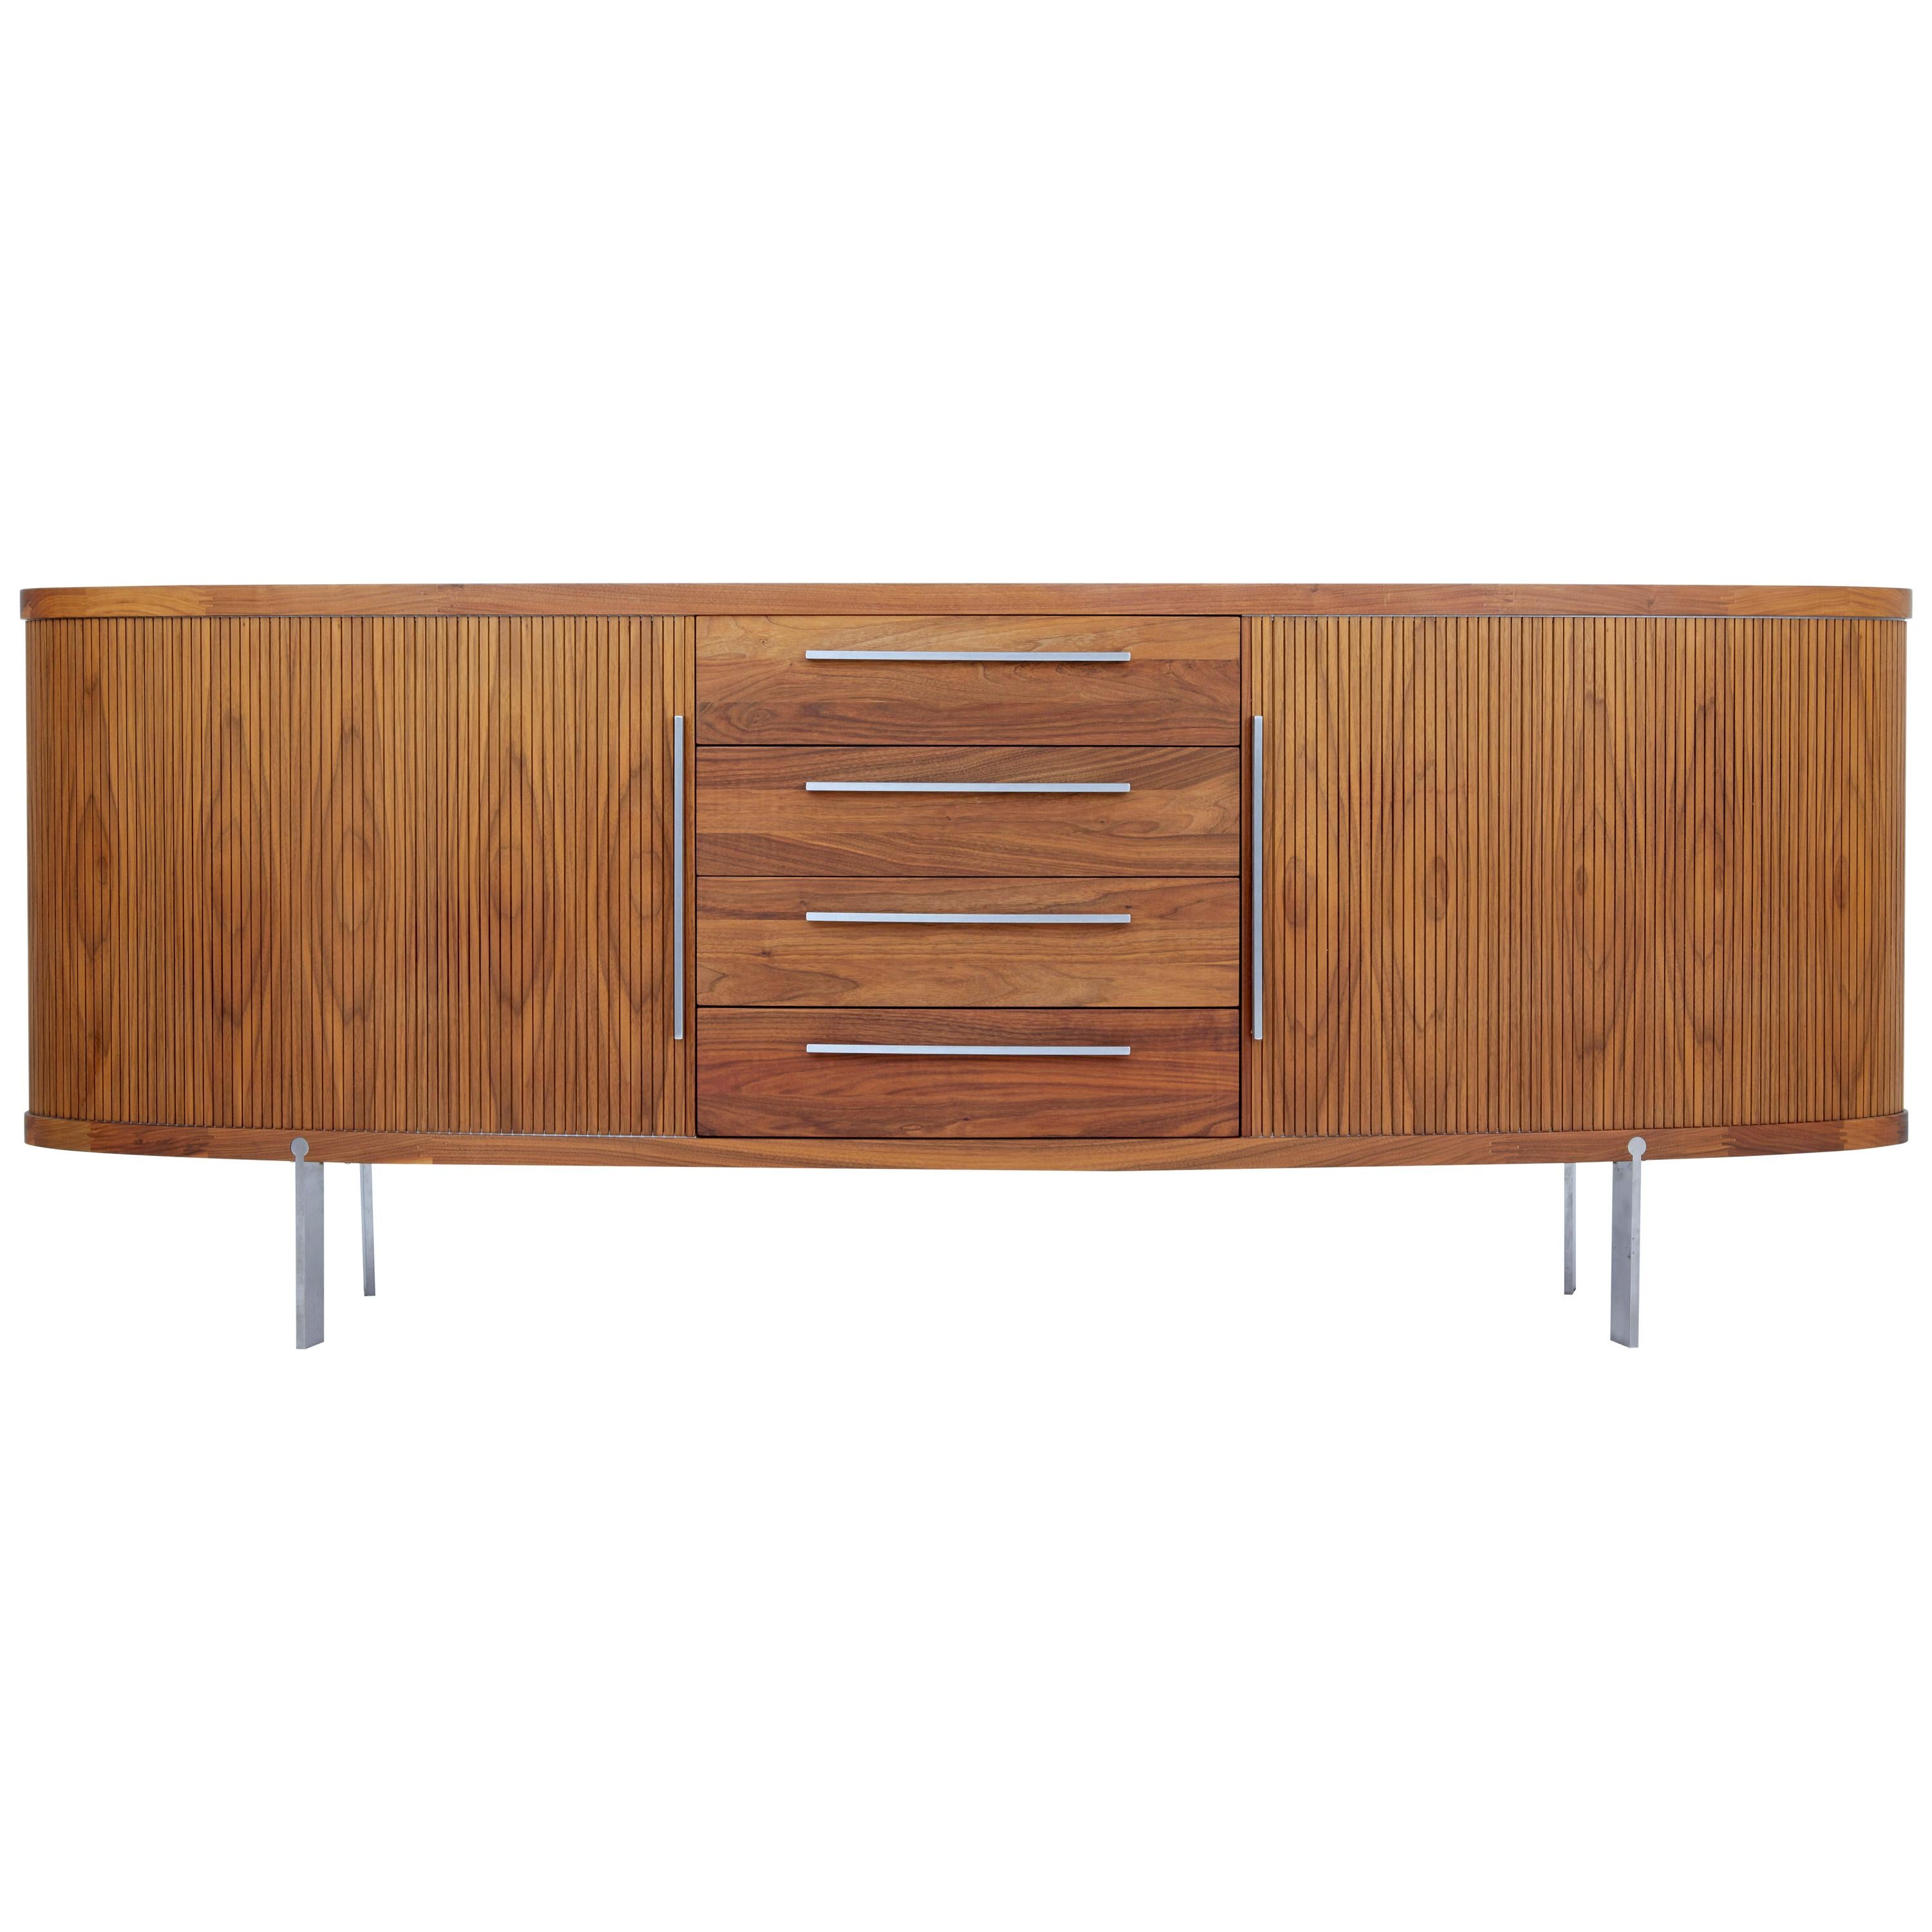 Danish Walnut Oval Tambour Naver Sideboard by Nissen and Gehl Mdd